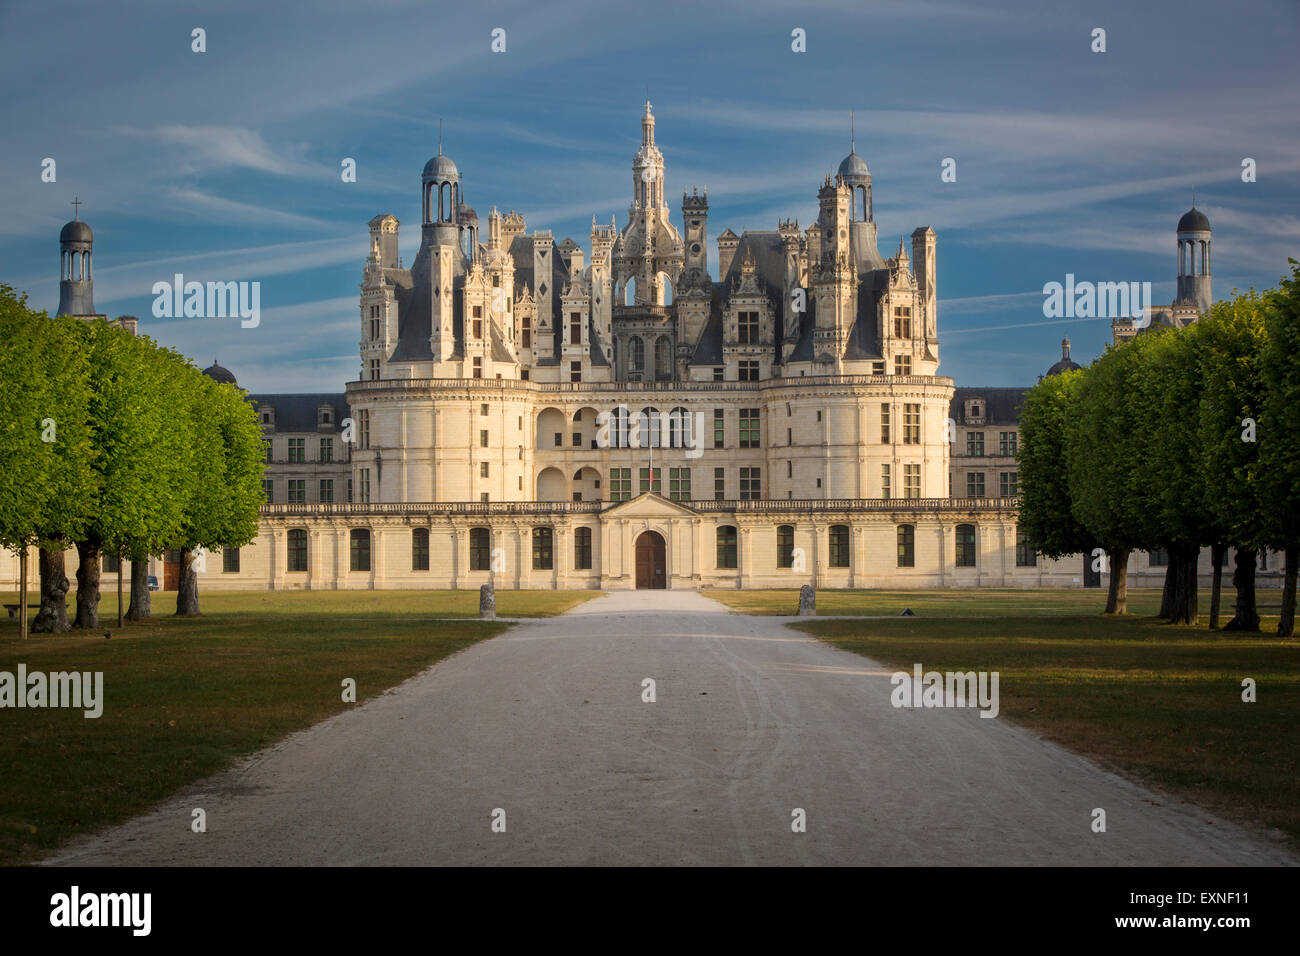 Early morning over Chateau de Chambord - originally built as a hunting lodge for King Francis I, Loire-et-Cher, Centre, France Stock Photo